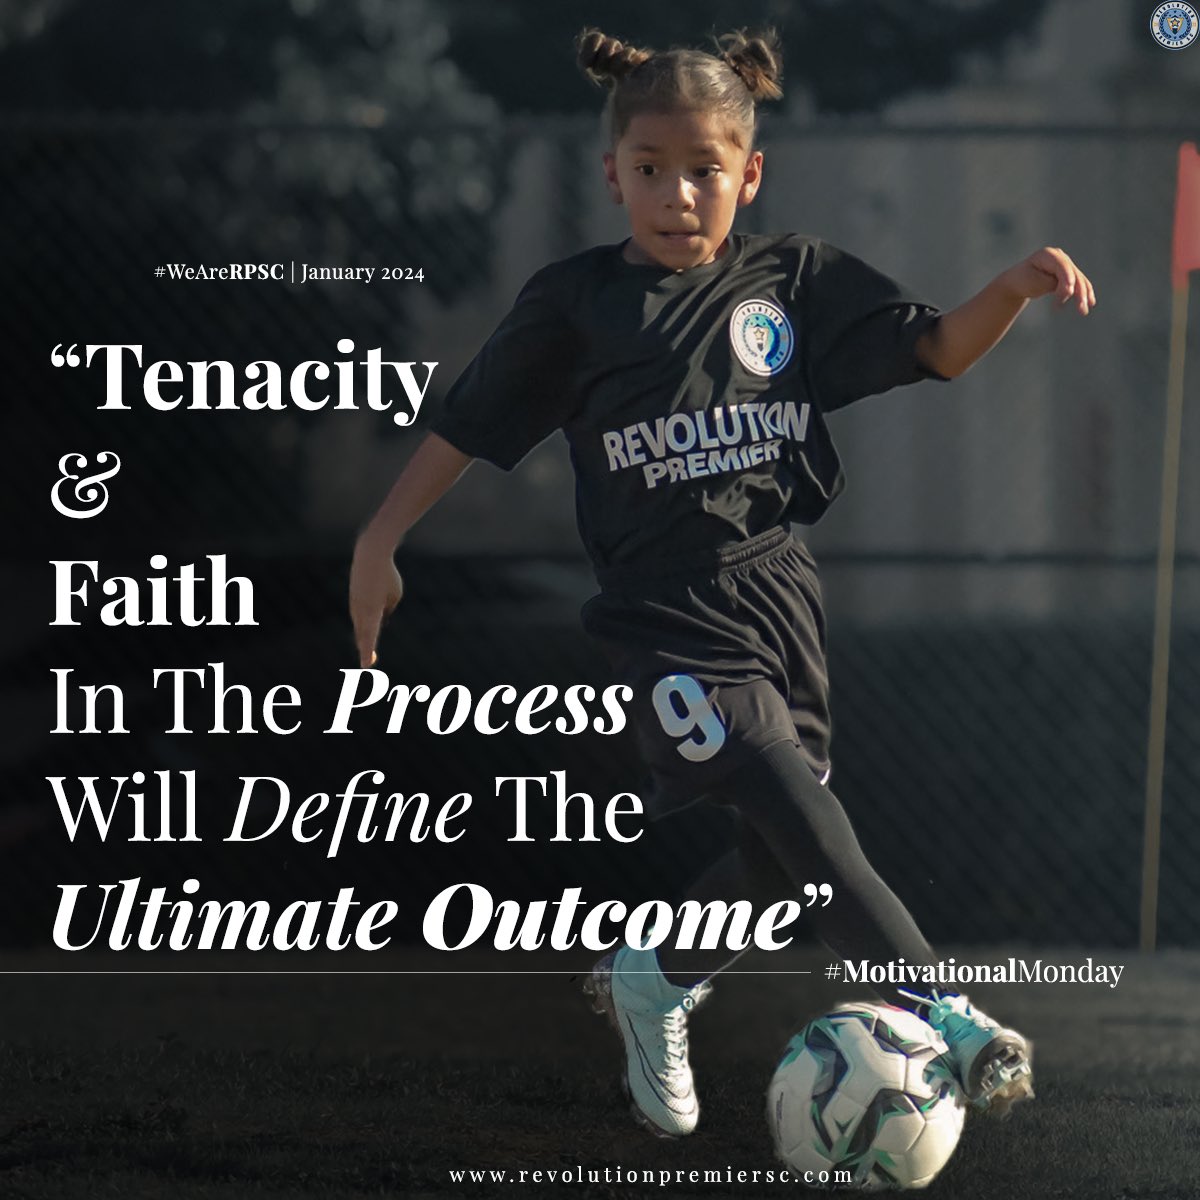 Tenacity and Unwavering Faith in the Process is what Fuels the Journey 🚀✨ #MotivationalMonday 

#RevolutionPremierSC #WeAreRPSC #RevUp #TrustTheProcess #FaithInTheProcess #Tenacity #Ultimate #Outcome #ChampionsMindset